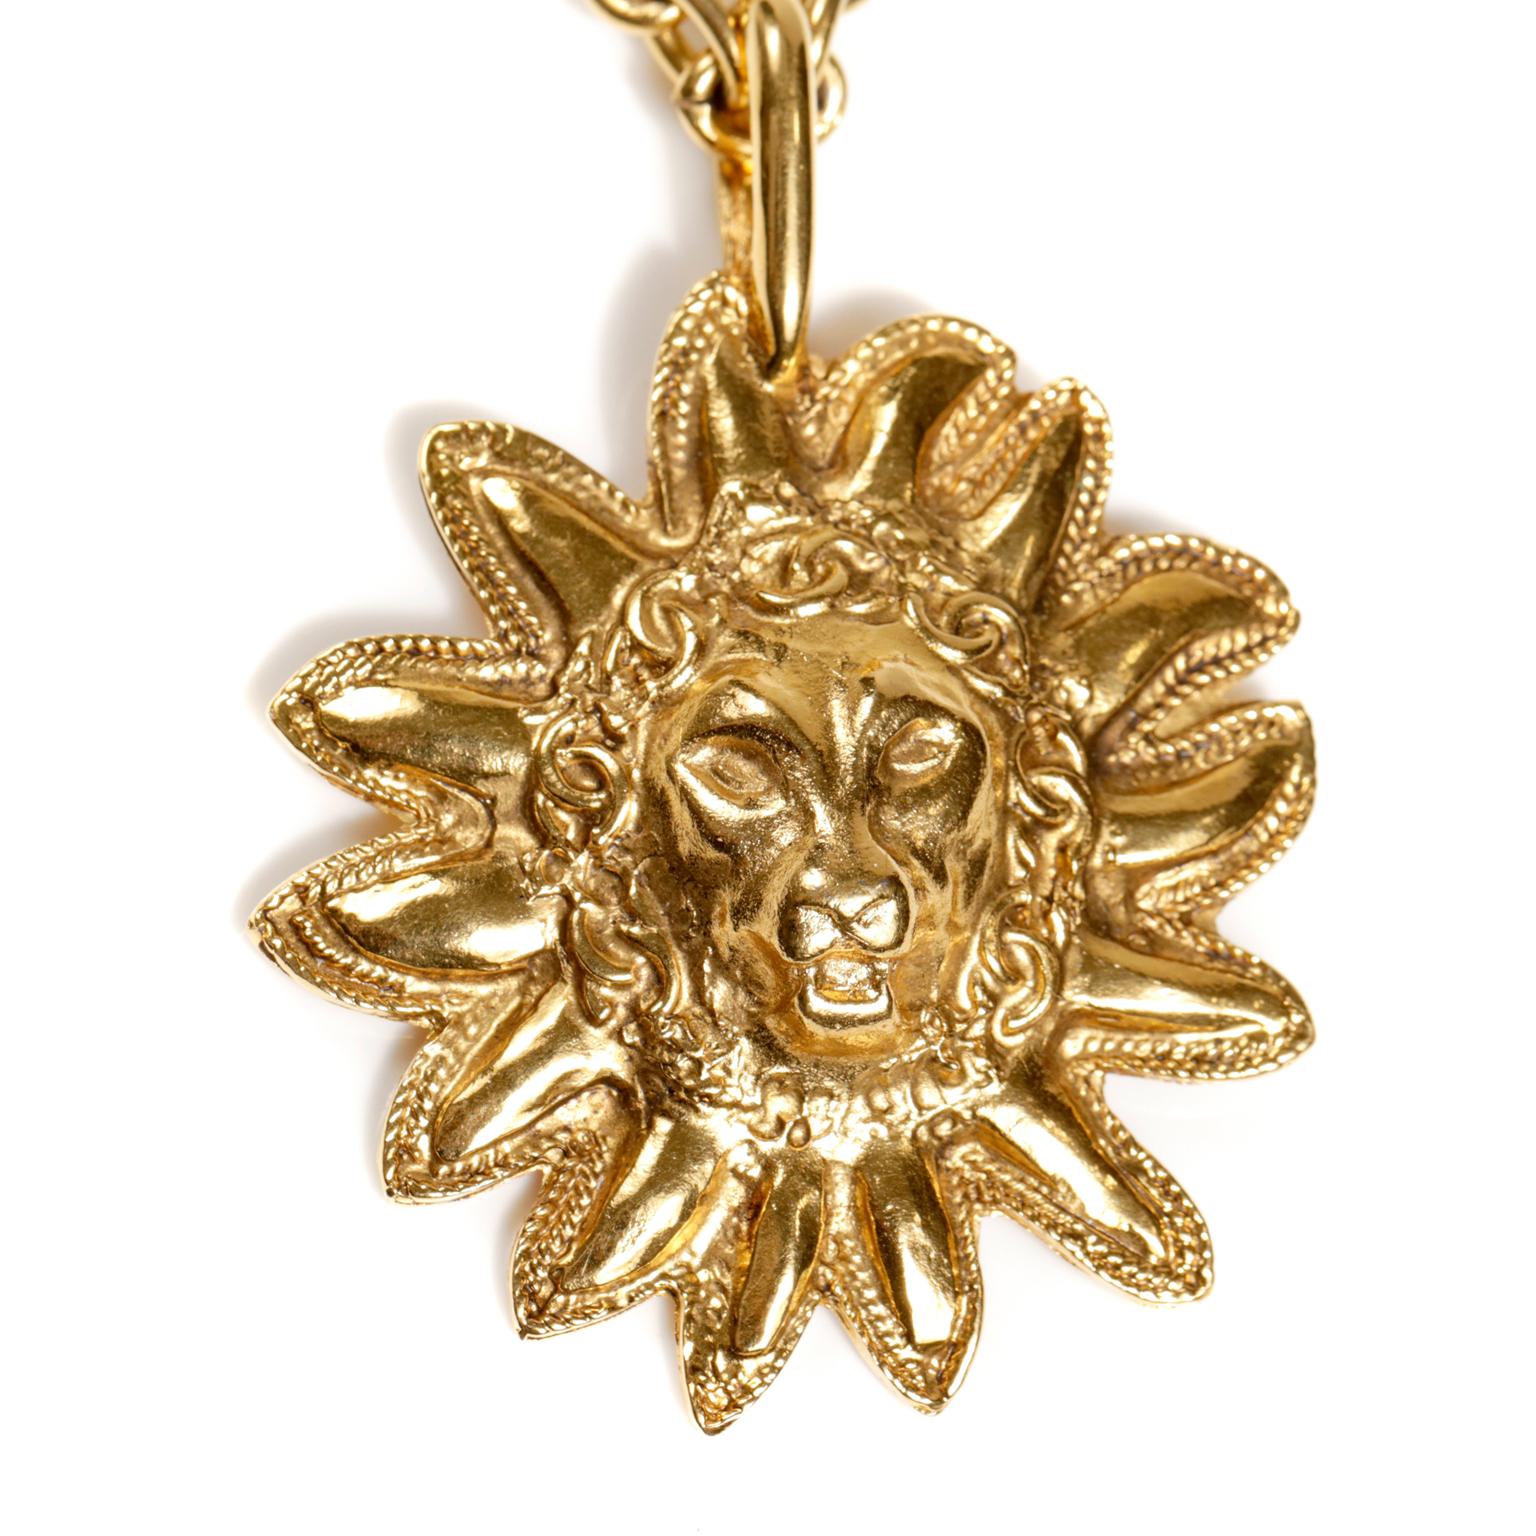 Chanel Gold Lion Sun Leo Vintage Necklace is in excellent condition.  From the 1980’s, it is a true classic.  Wearable with everything from t shirts to evening gowns.  
Gold tone large sun pendant with lion face.  Long gold tone linked chain with